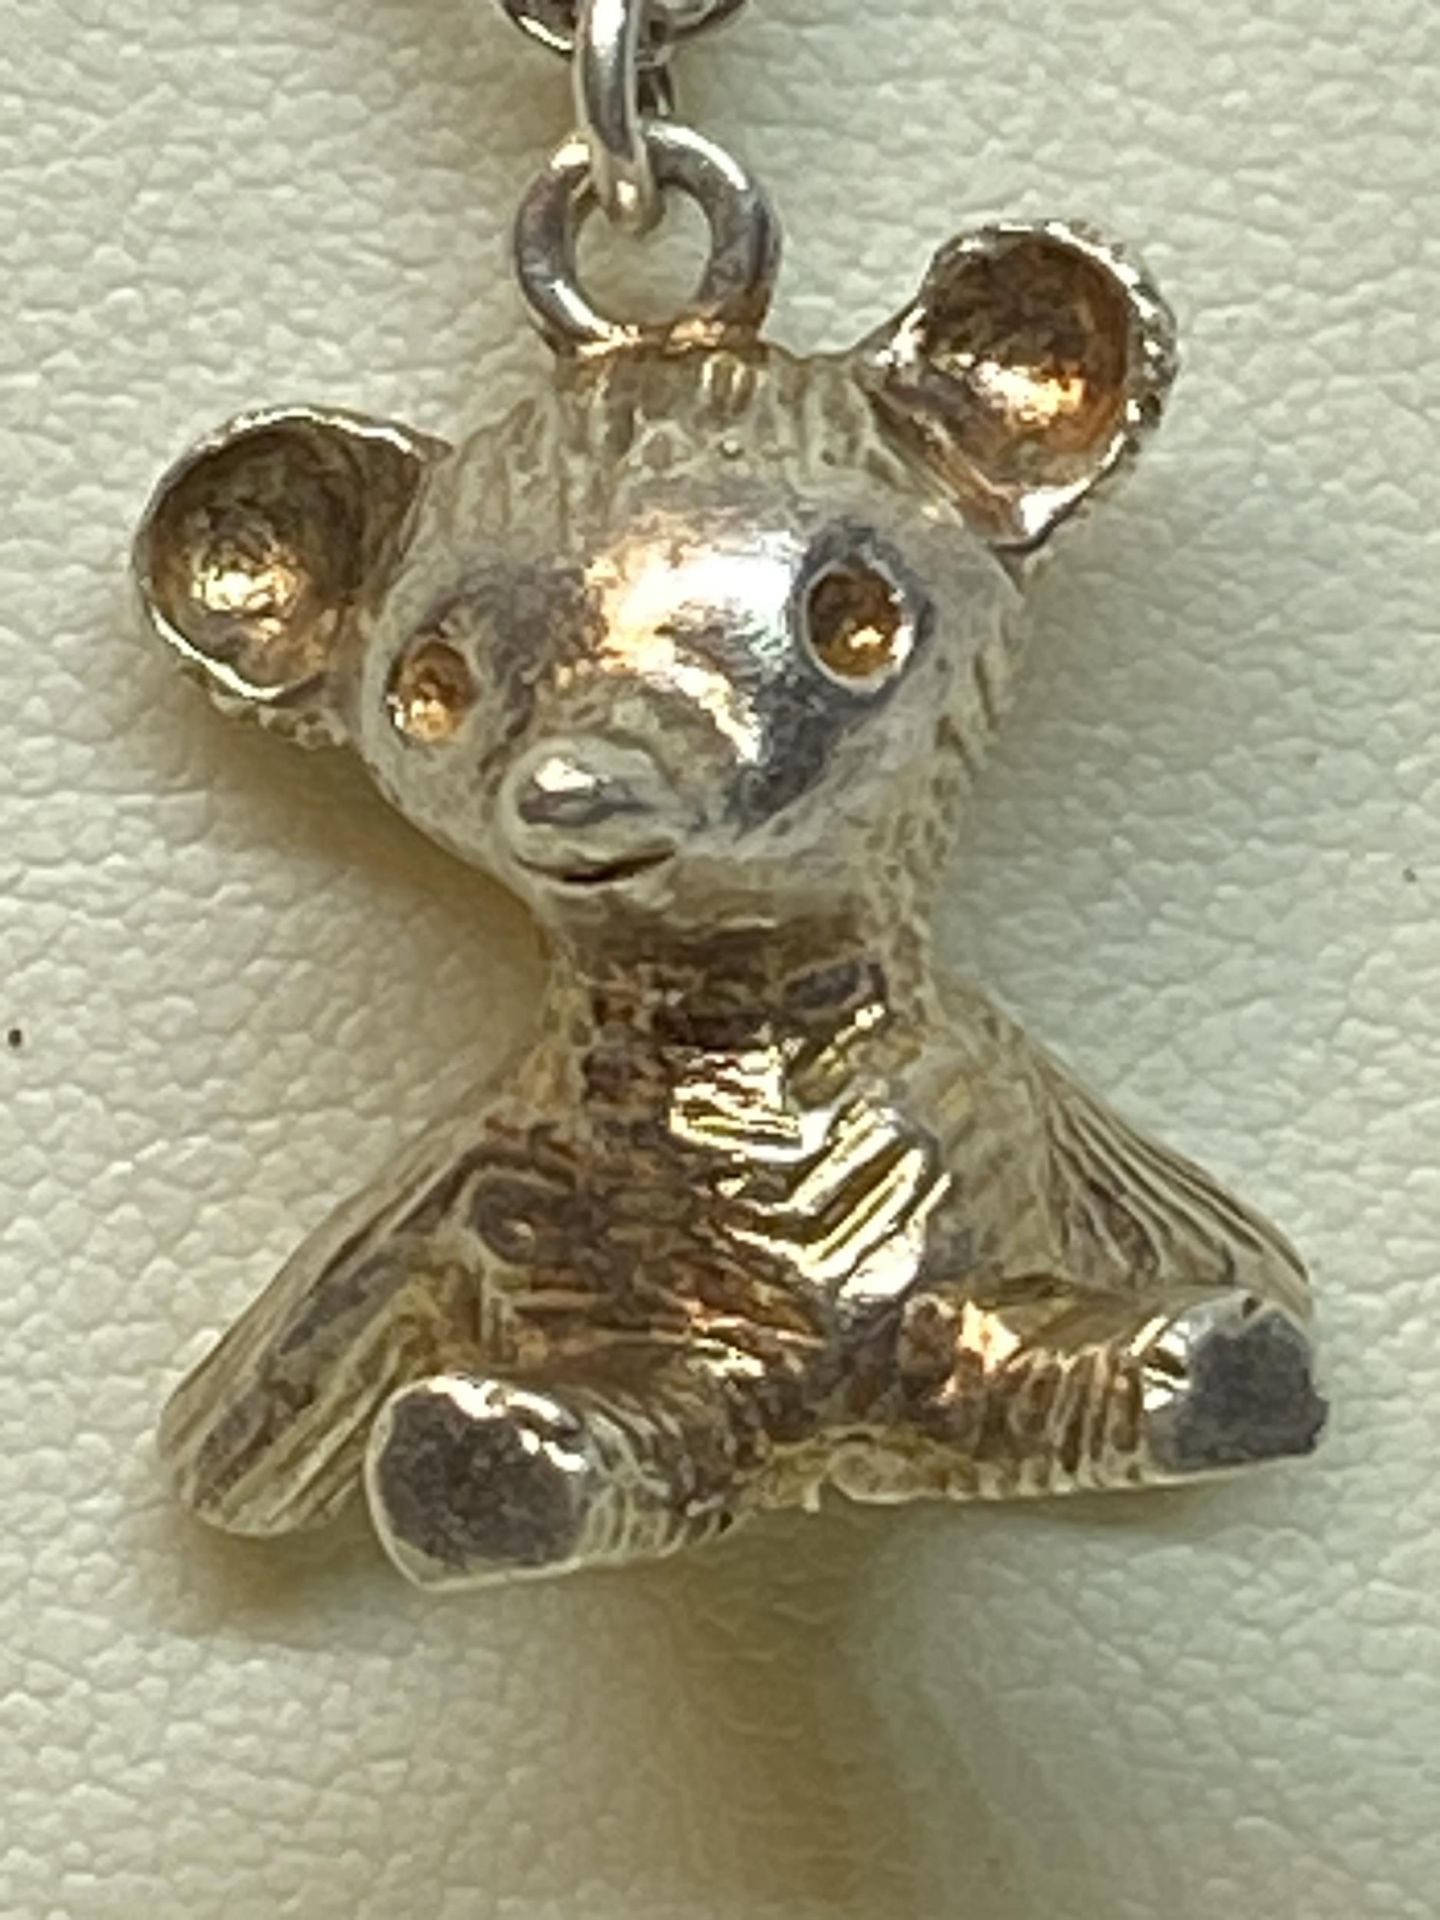 A SILVER TEDDY BEAR NECKLACE IN A PRESENTATION BOX - Image 2 of 2